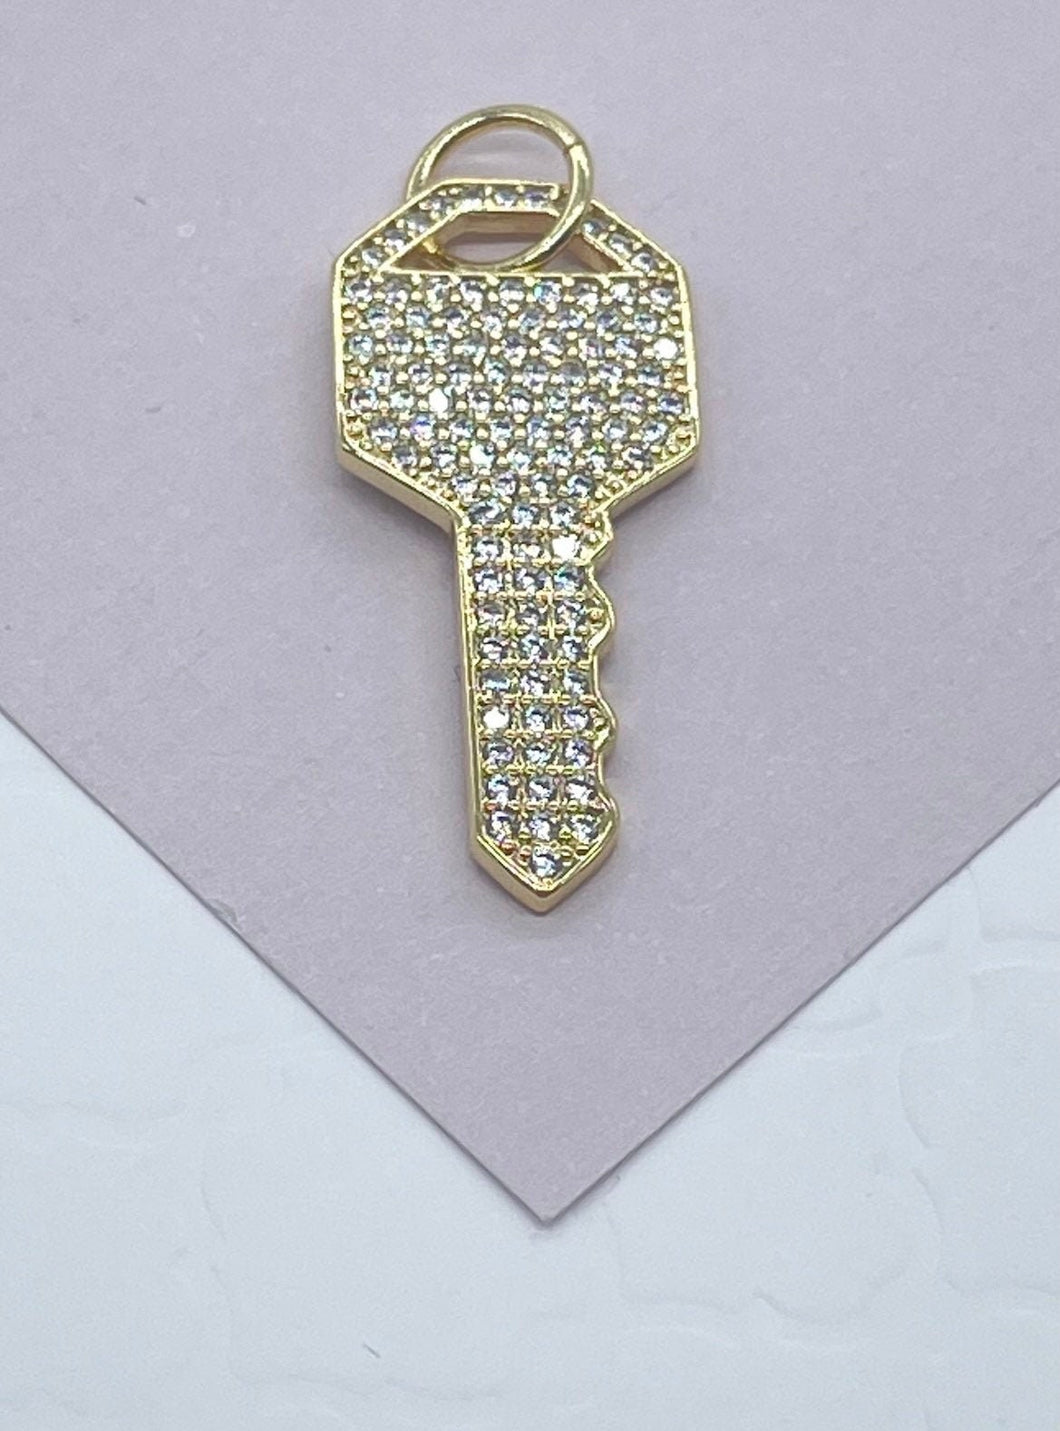 18k Gold Filled Key Charm with Micro Pave Cubic Zirconia Wholesale Zirconia